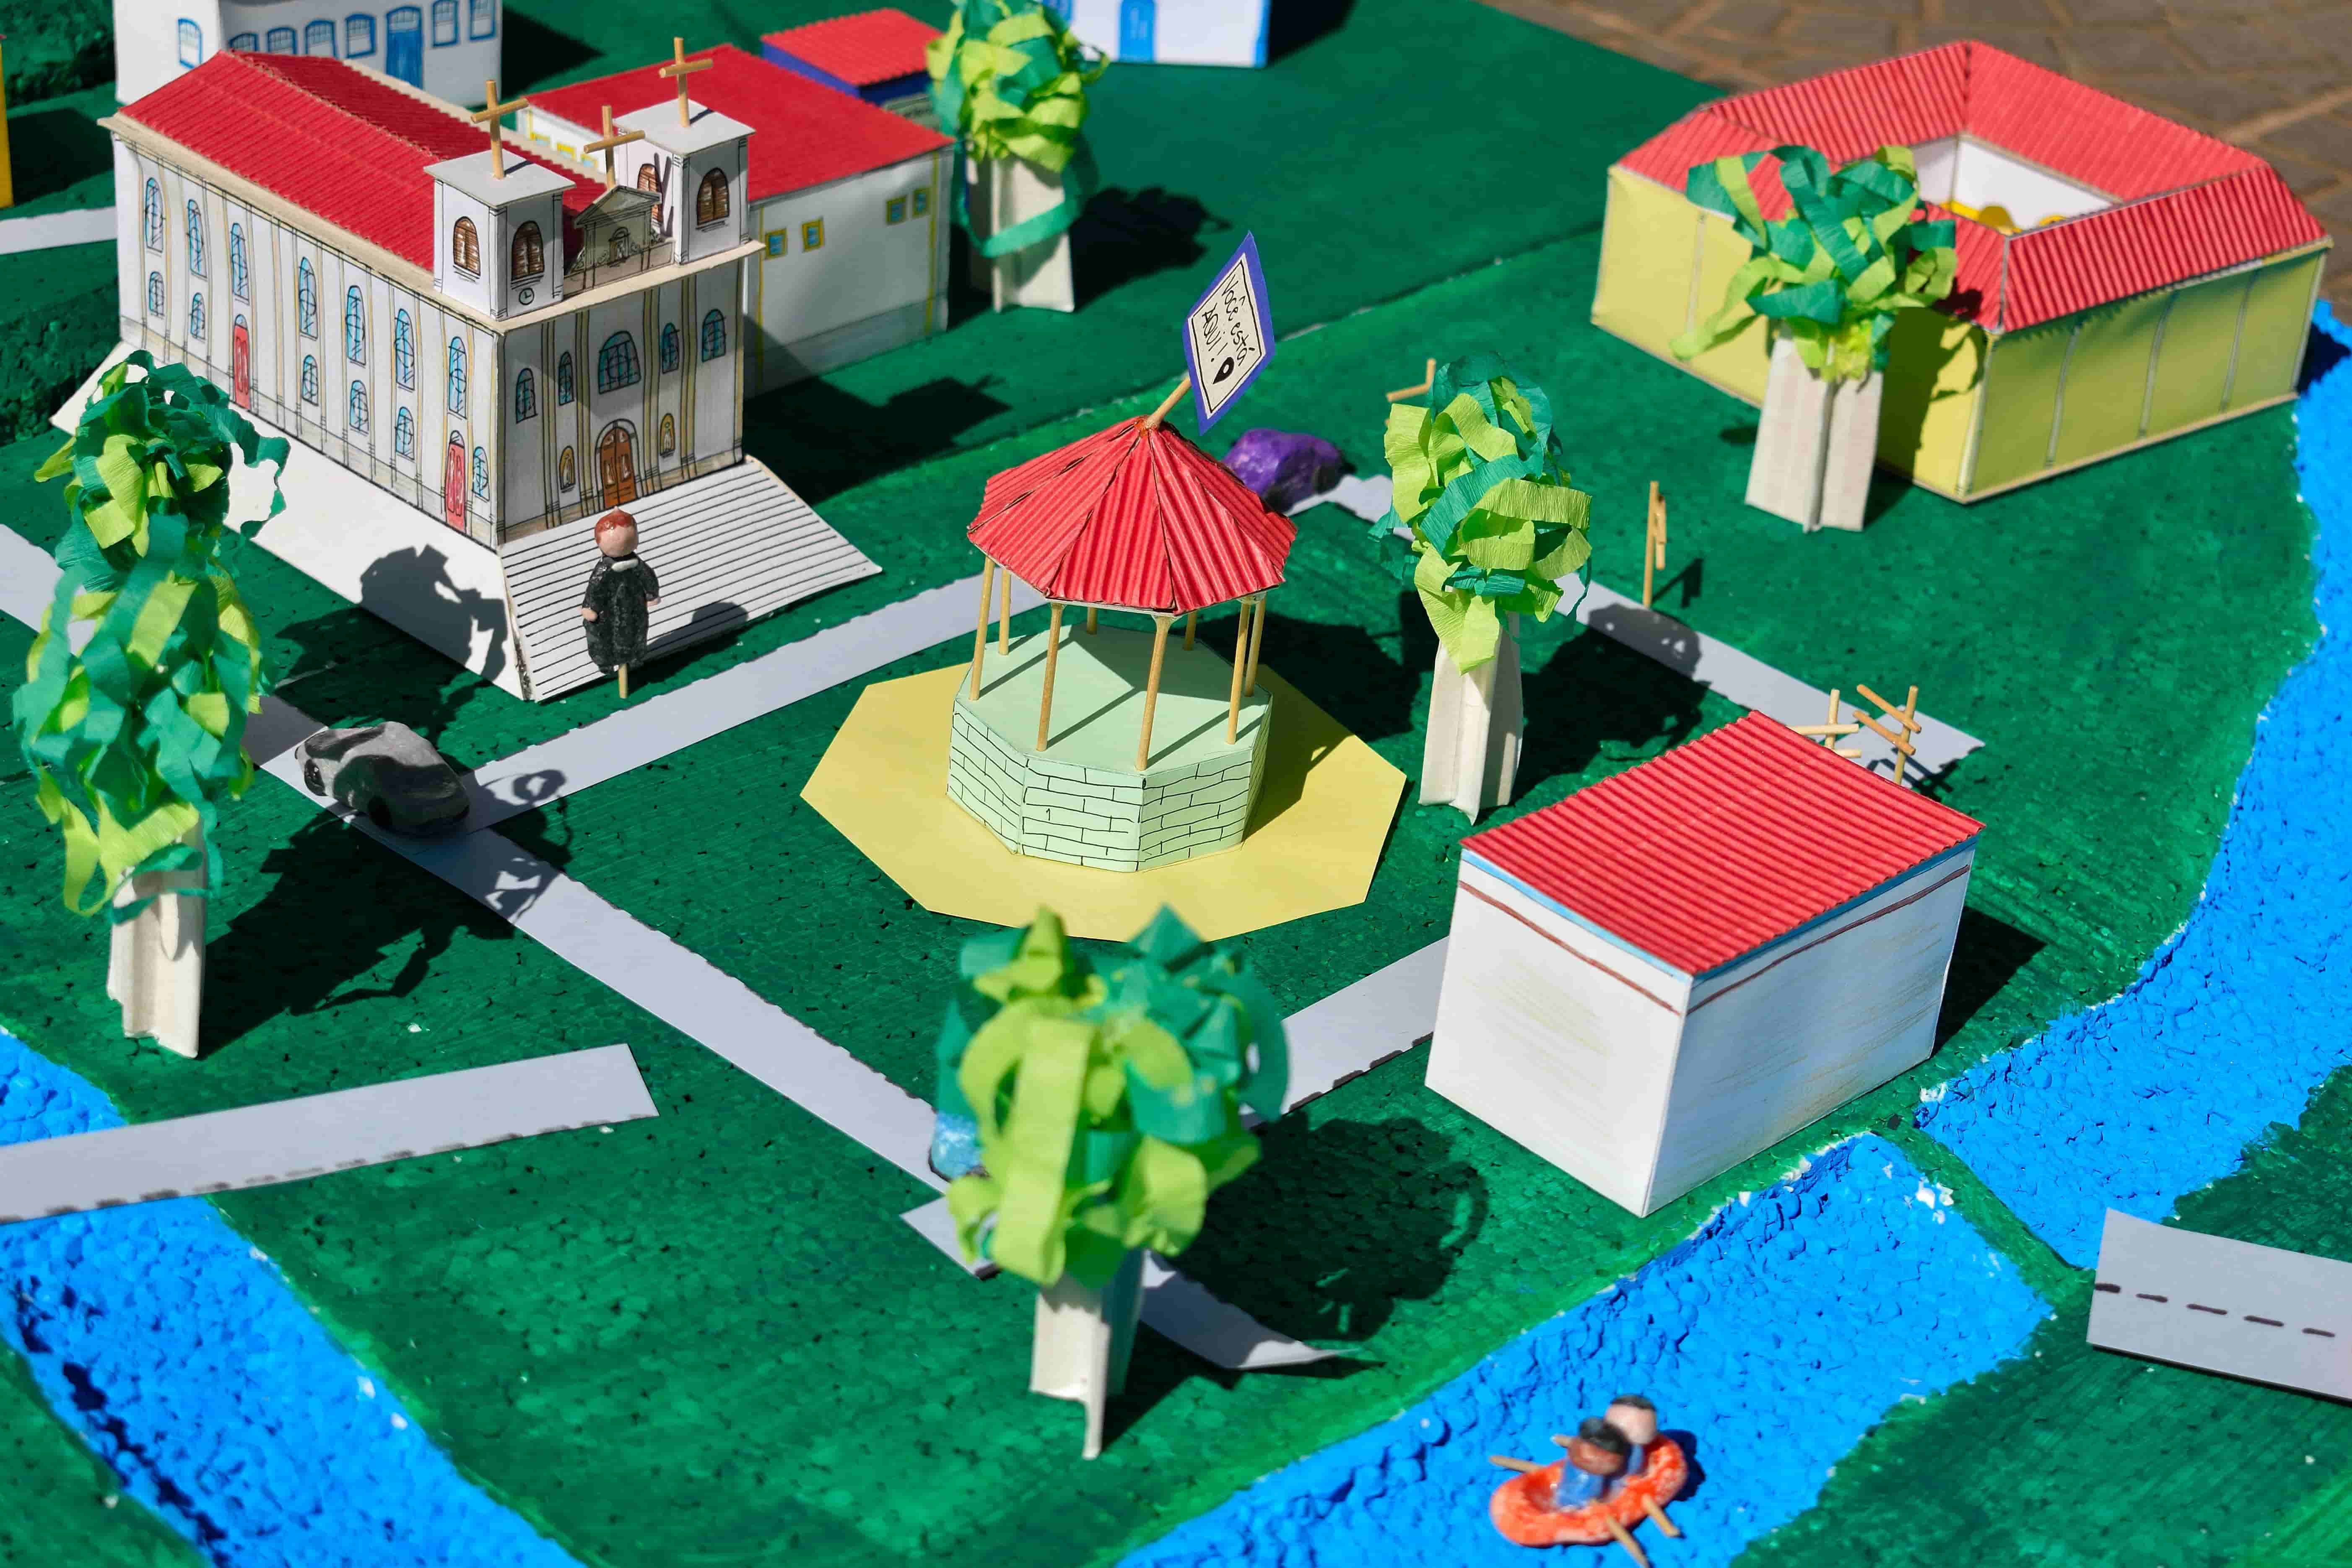 The participatory 3D model, s made of low-cost materials, was used to represent the territory and its elements for the intervention (©Miguel Angel Trejo-Rangel, 2019).